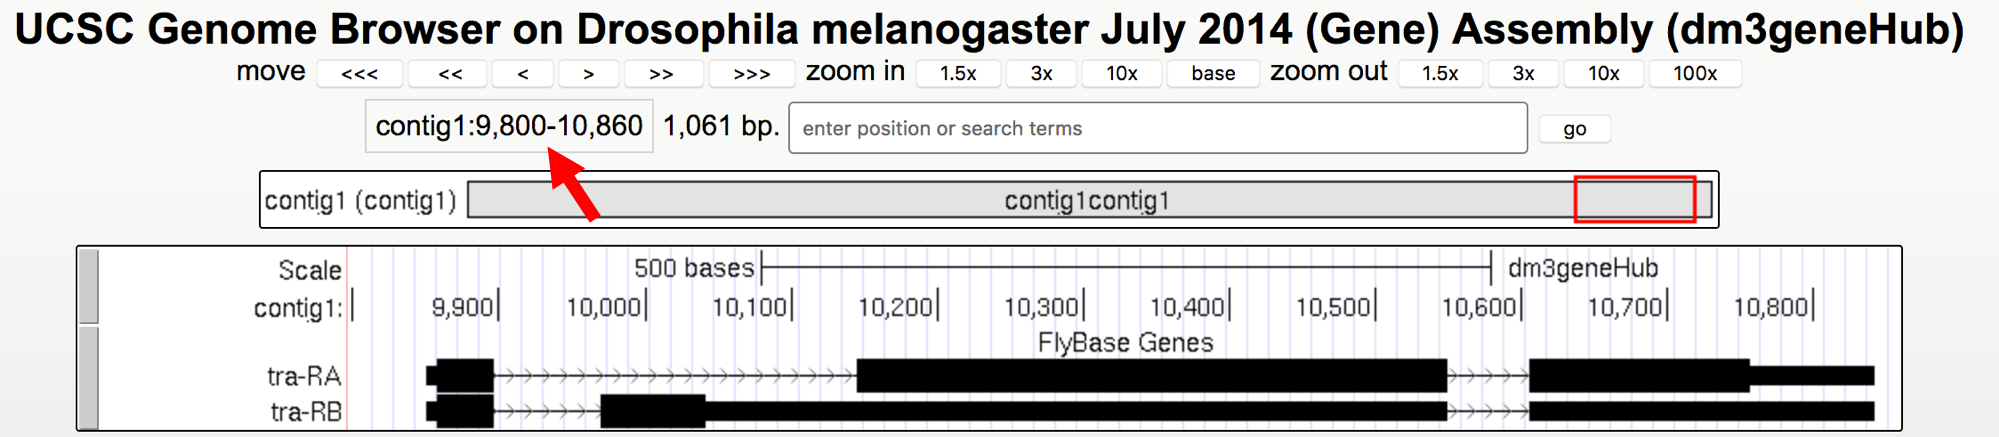 Genome Browser view of the *tra* gene